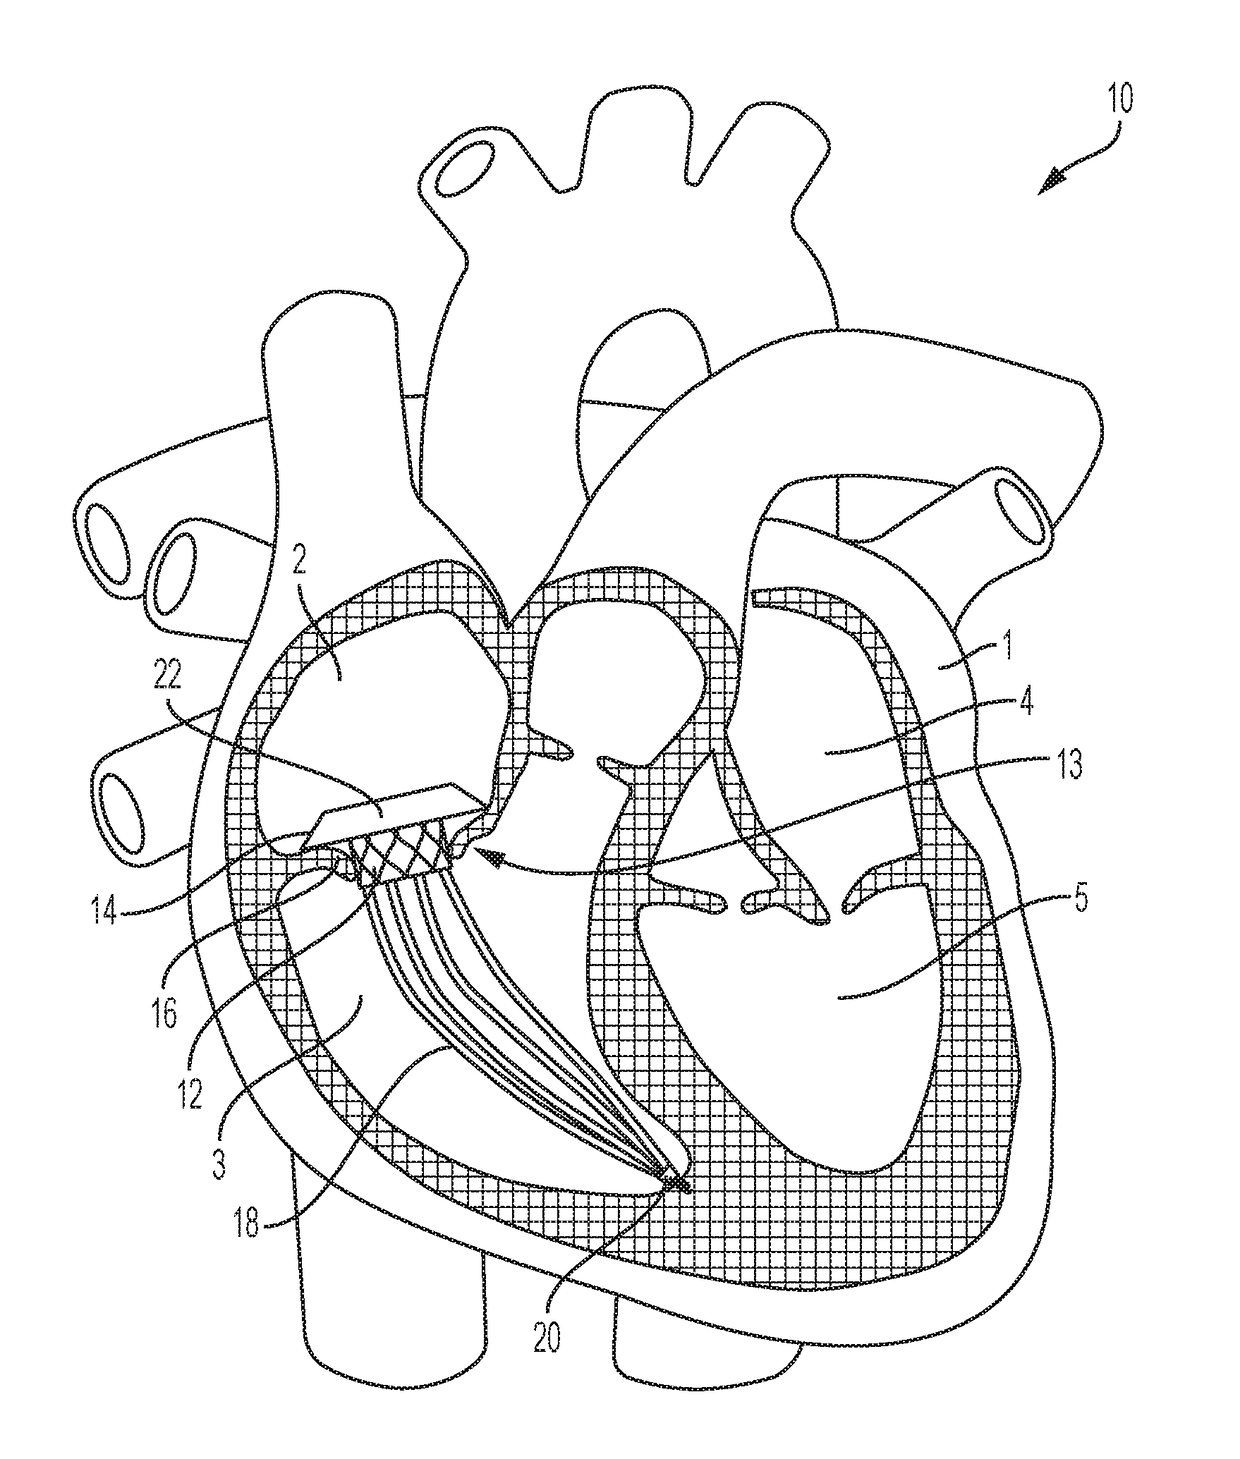 Transcatheter atrial sealing skirt, anchor, and tether and methods of implantation